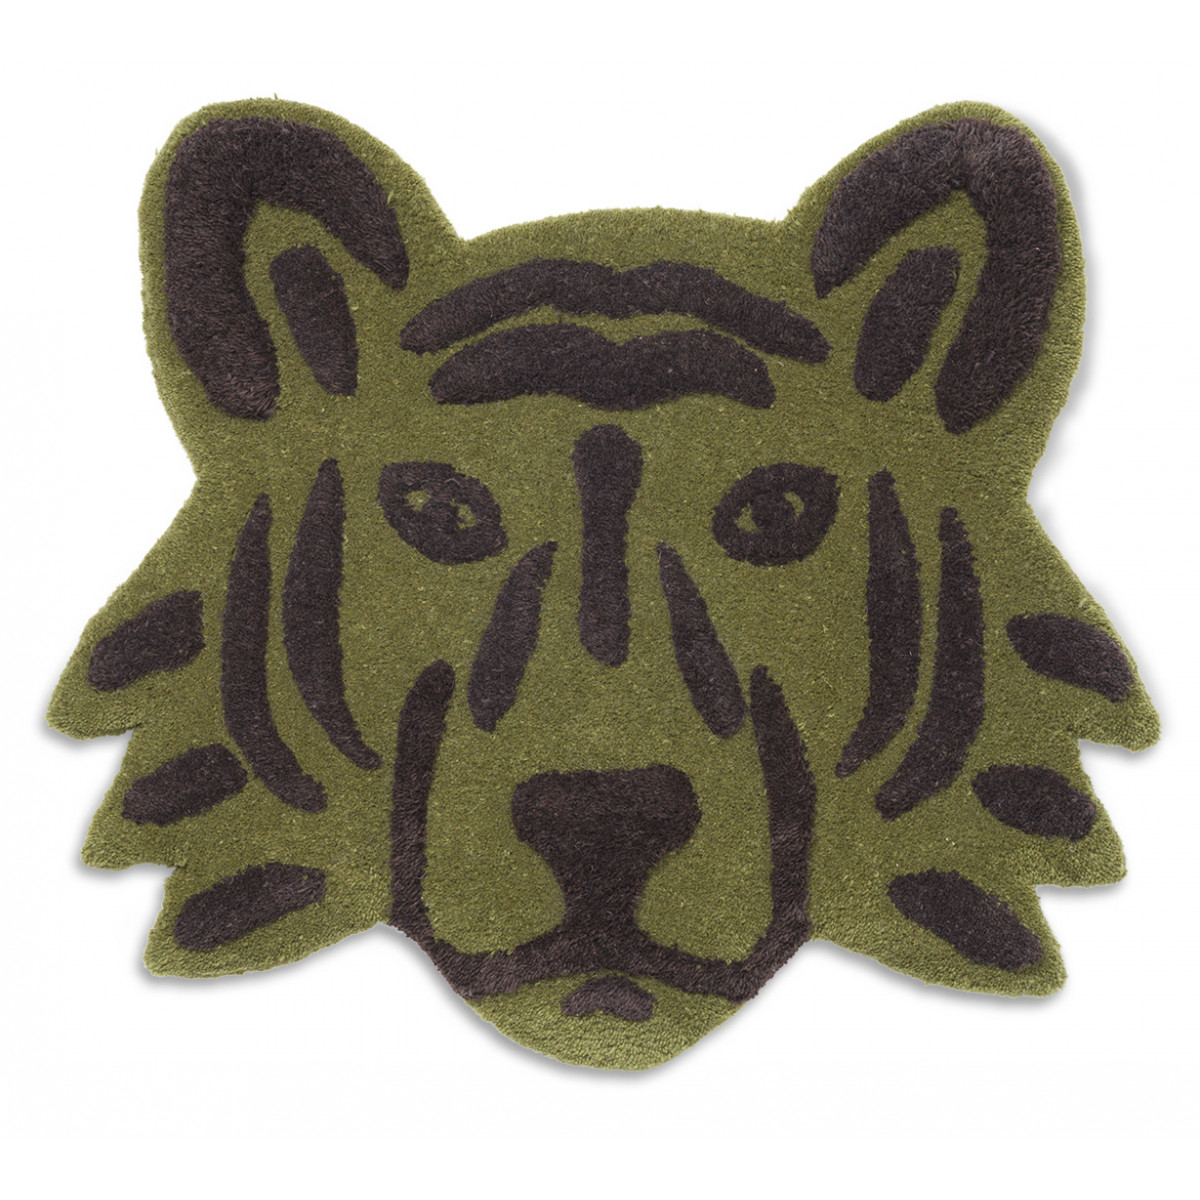 SOLD OUT Tiger Head - tufted rug